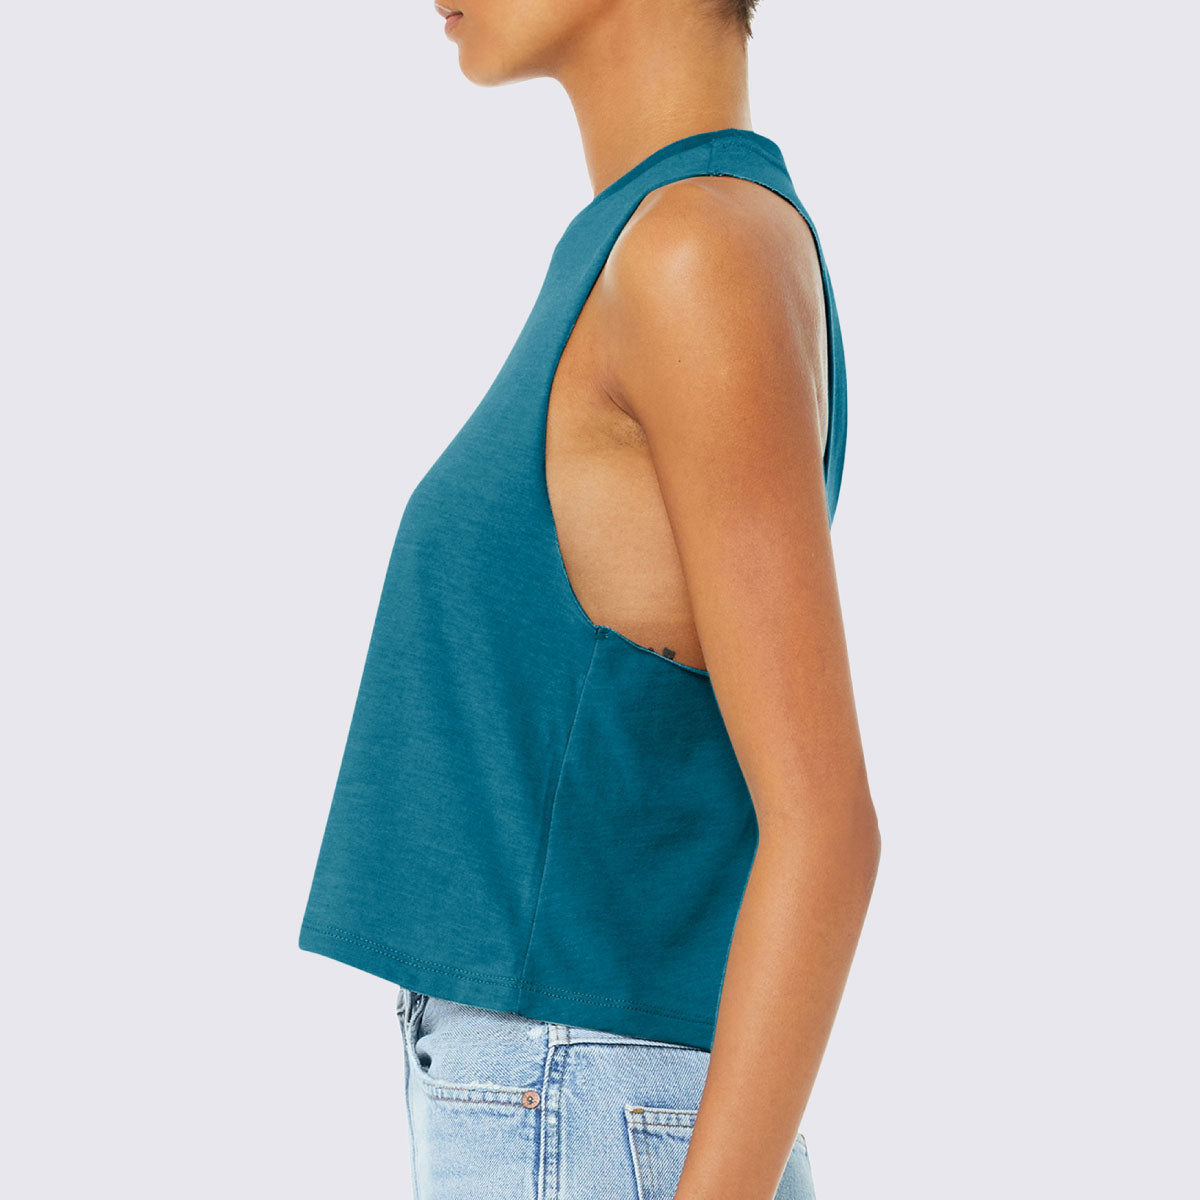 The Limit Does Not Exist Racerback Crop Tank - The LFT Clothing